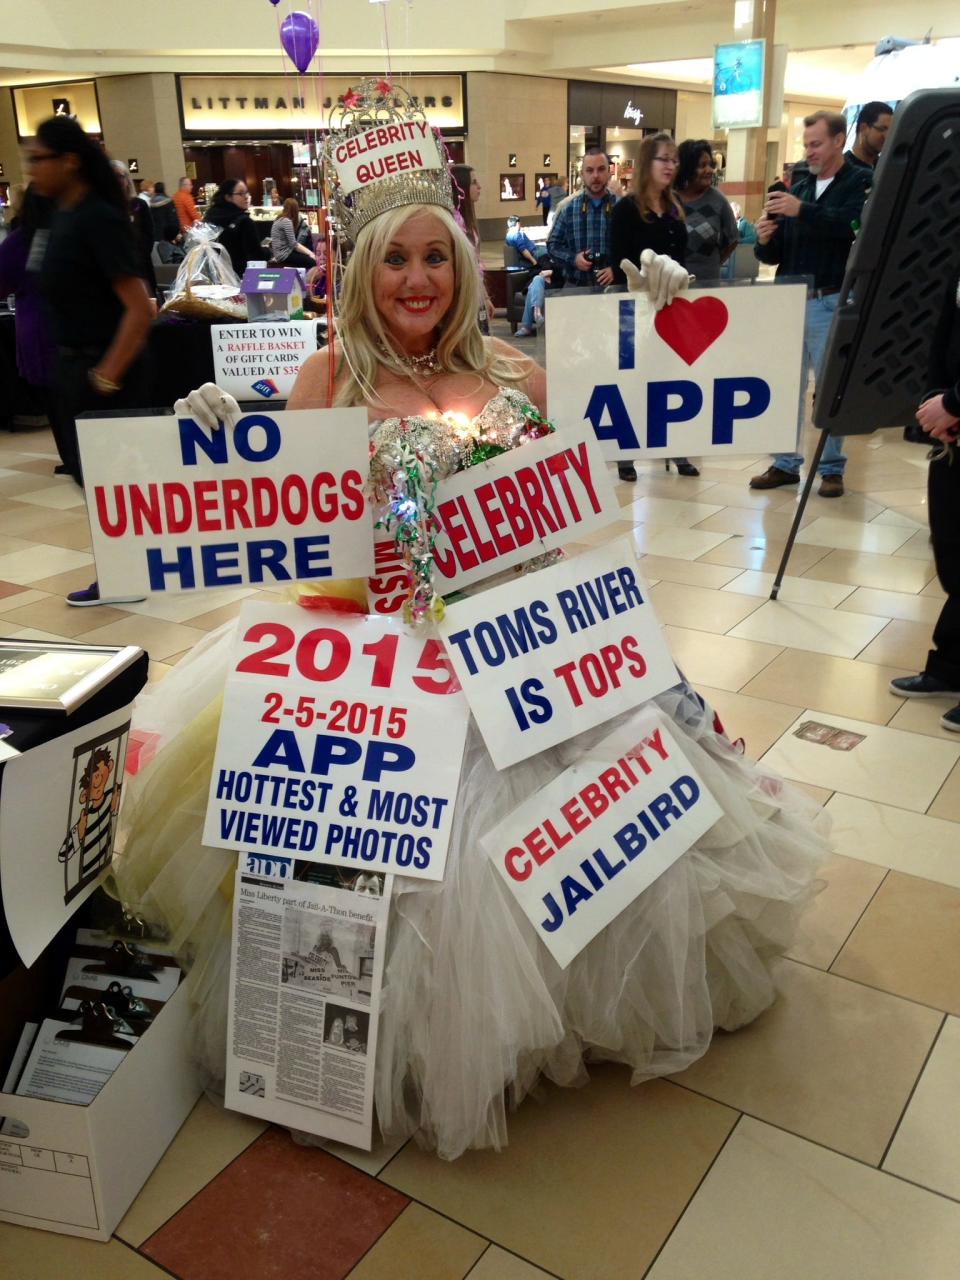 Sondra Fortunato, aka Miss Liberty, stands outside the “jail” inside Ocean County Mall.